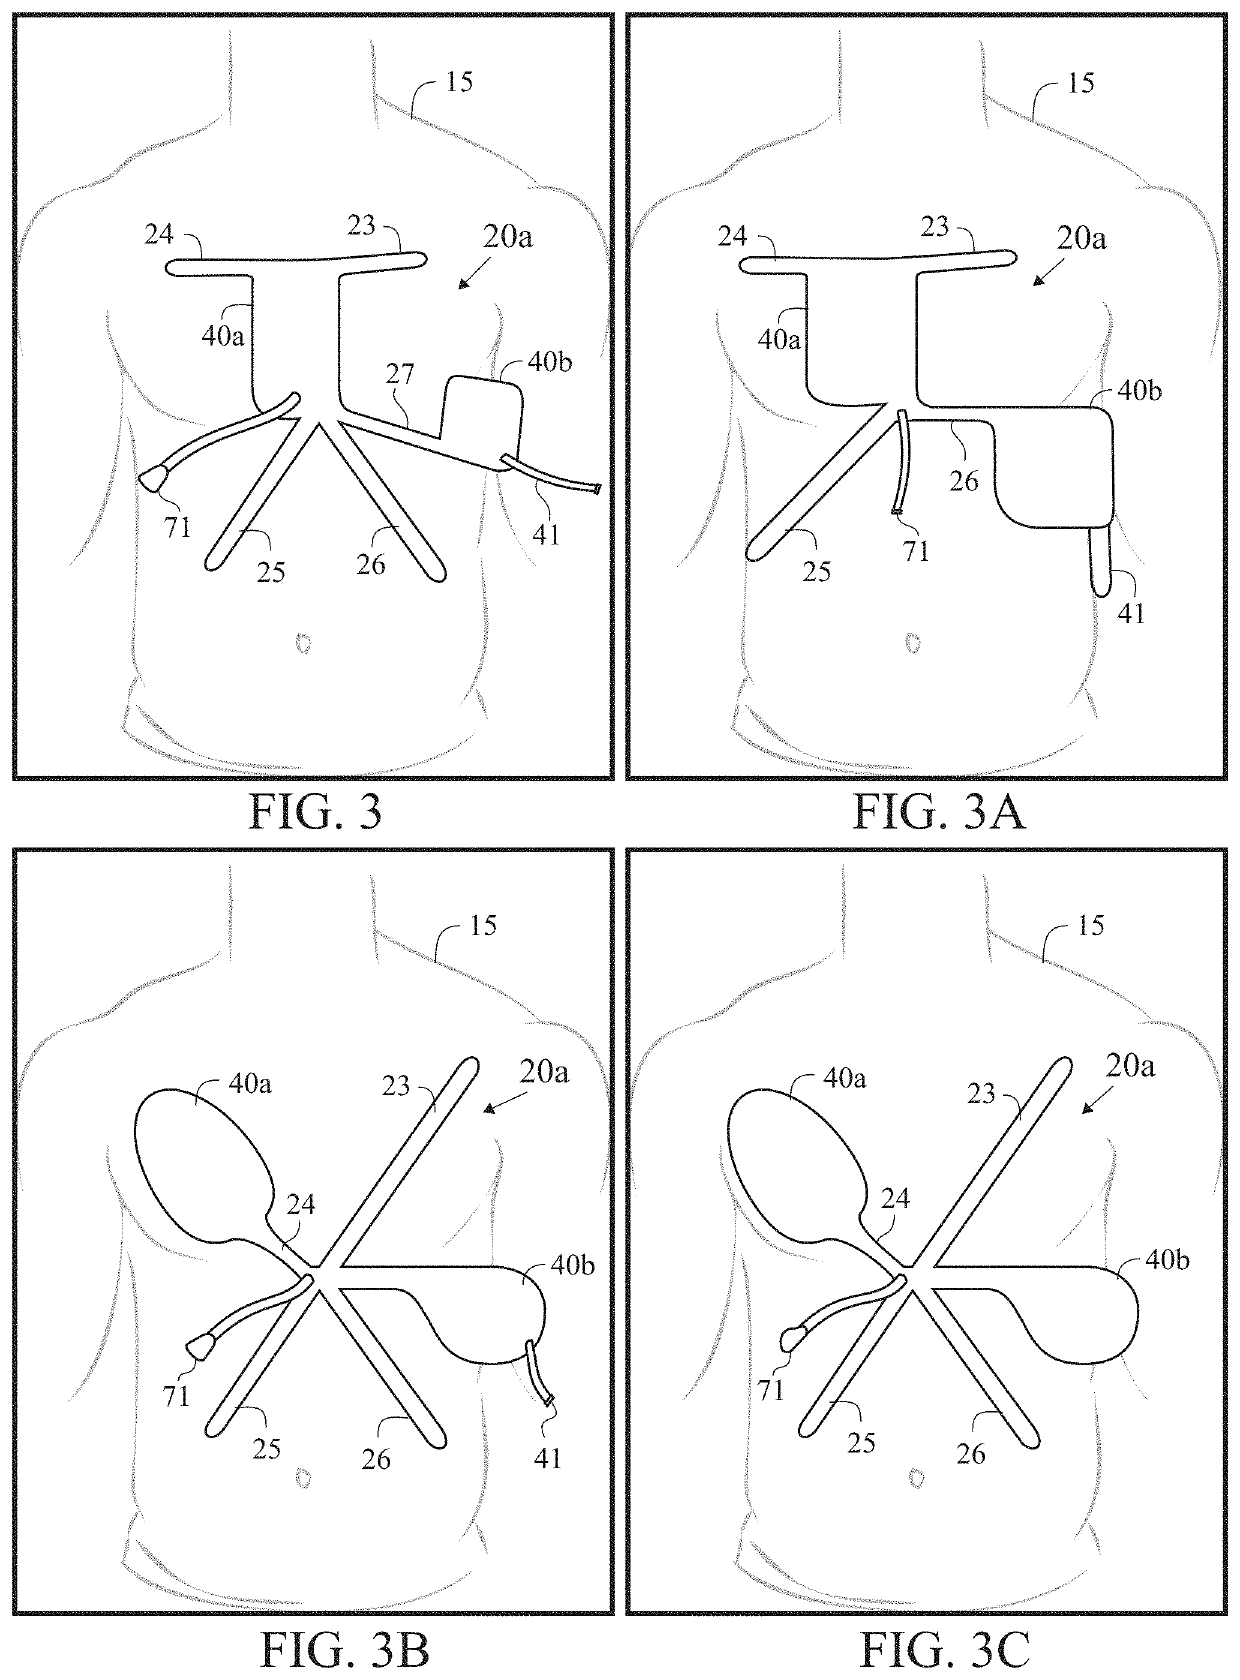 Emergency cardiac and electrocardiogram electrode placement system